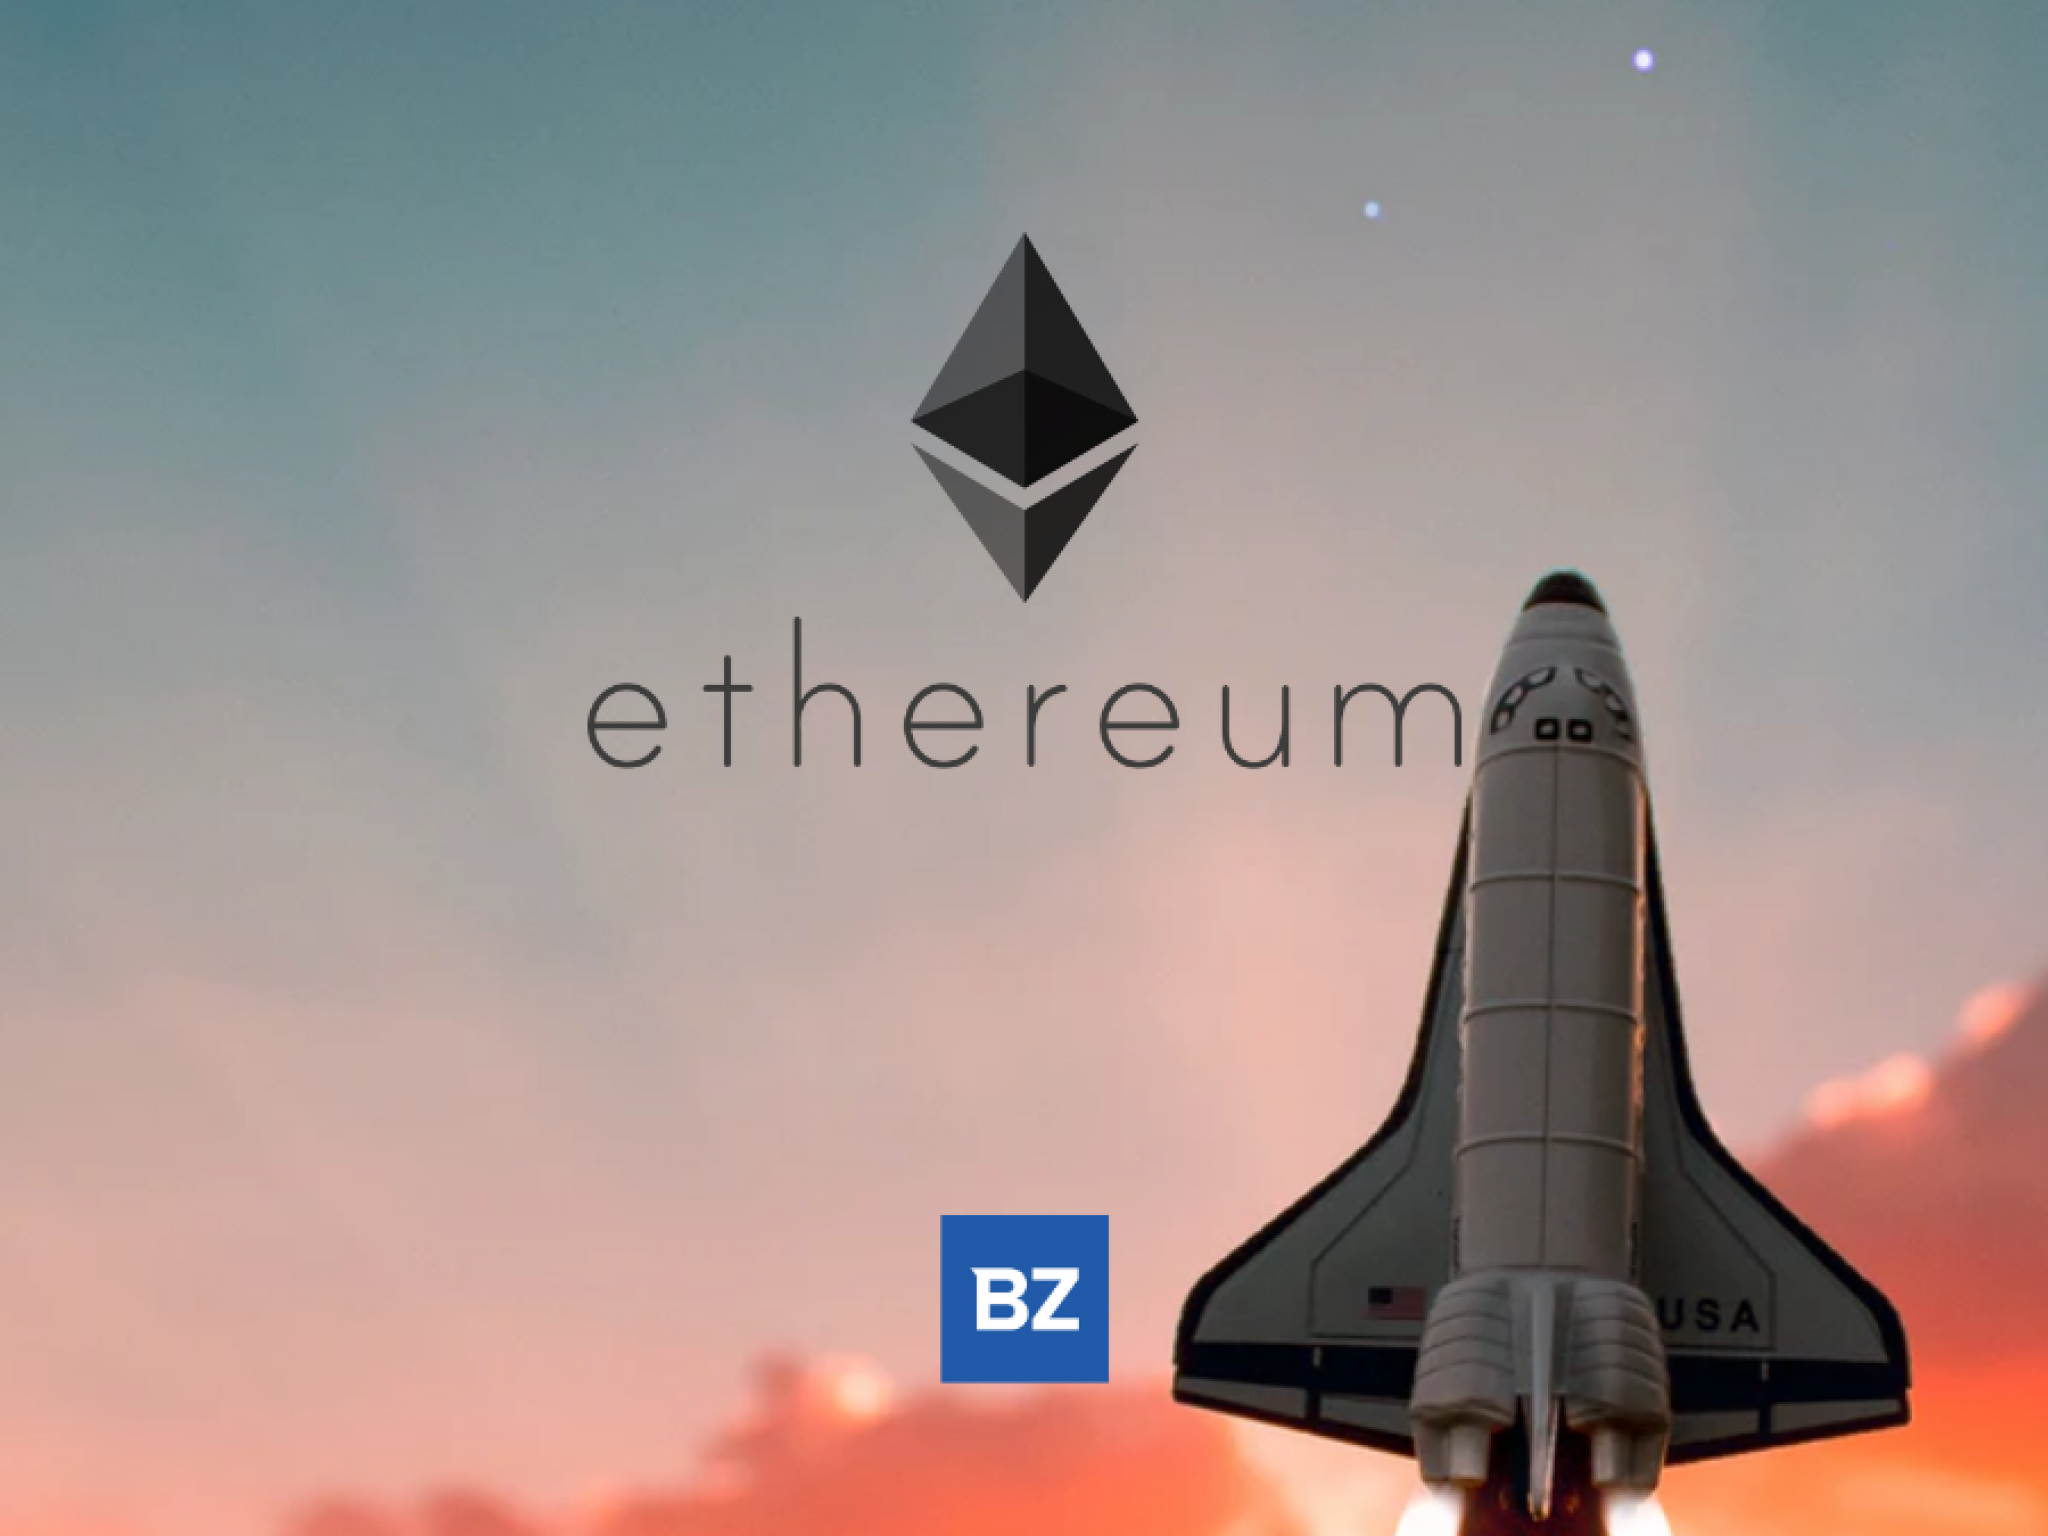  ethereums-price-increased-more-than-4-within-24-hours 